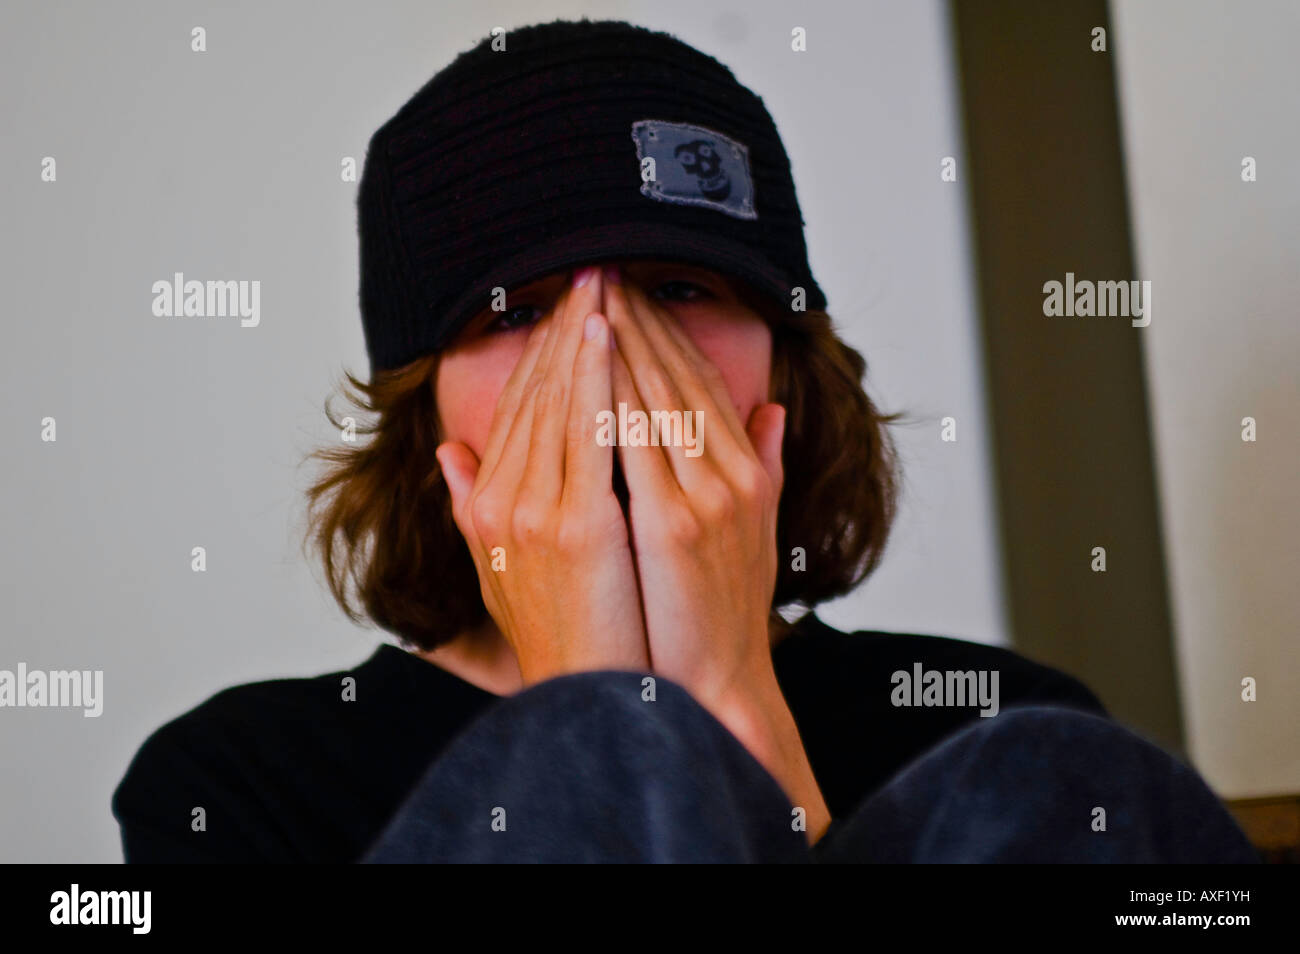 Young teenage boy with long hair and black cap hiding his face behind his  hands Stock Photo - Alamy